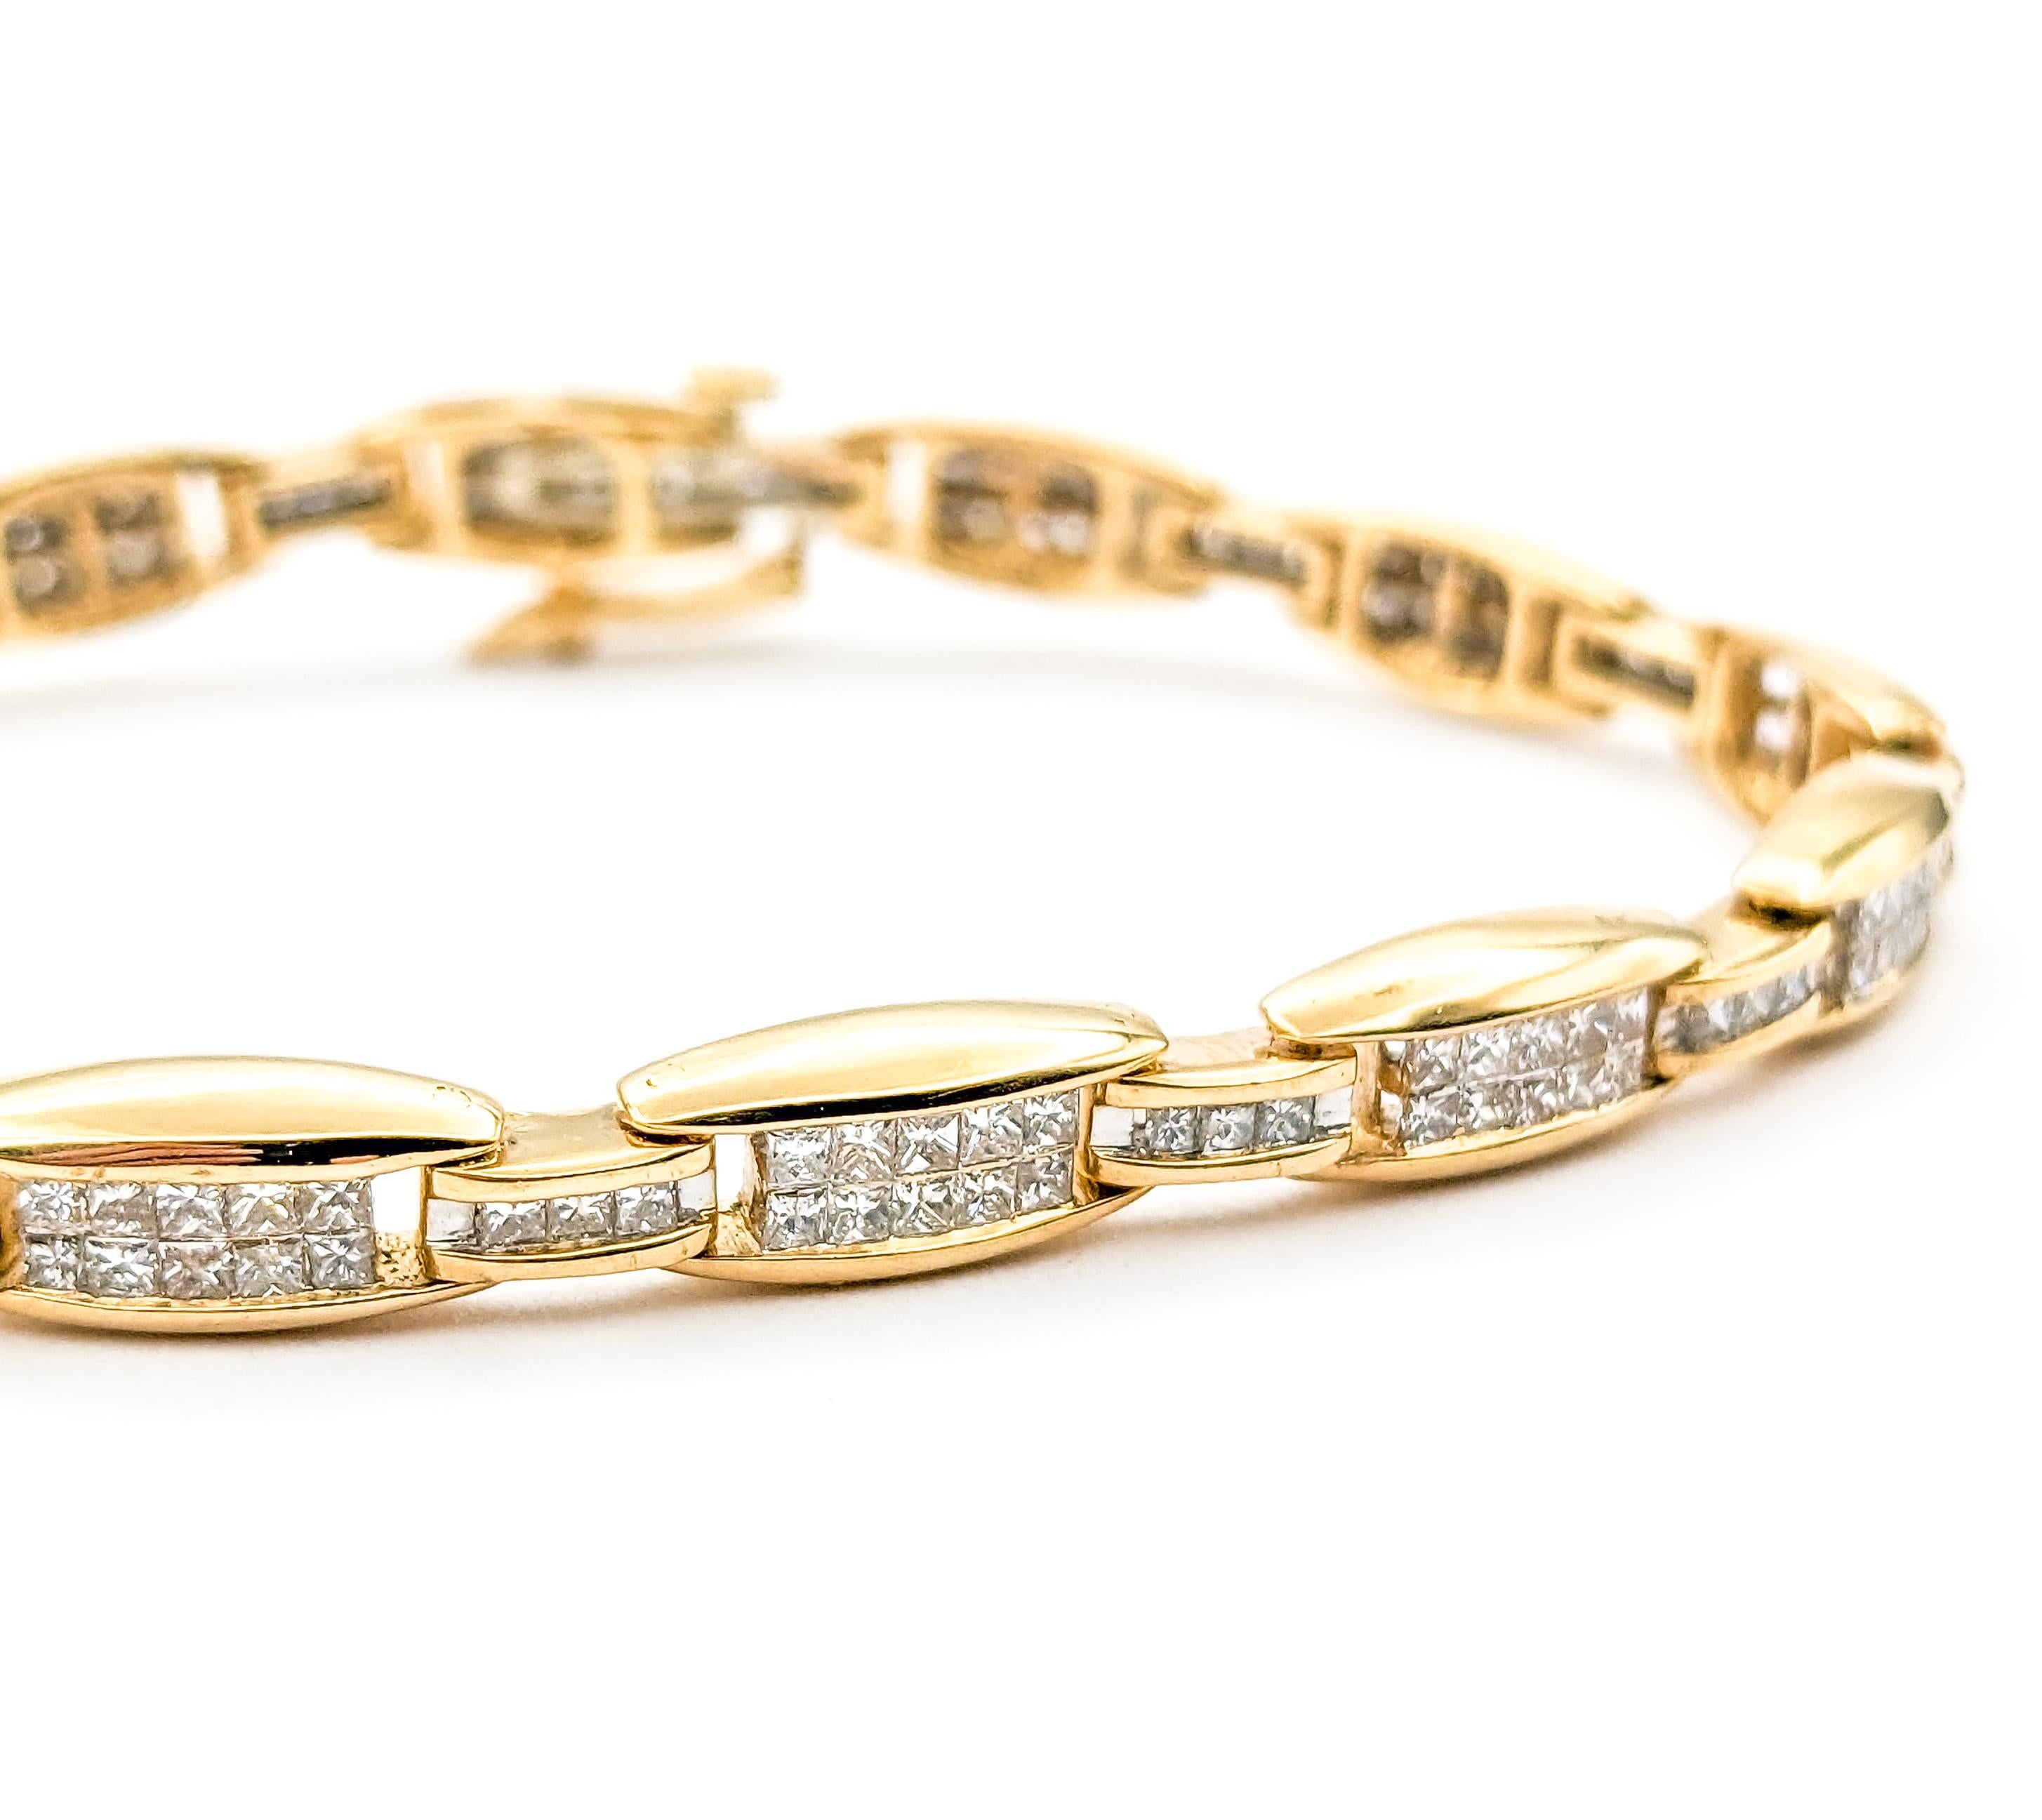 3.0ctw Diamond Tennis Bracelet In Yellow Gold

Crafted from 14kt yellow gold, this tennis bracelet is a stunning piece of jewelry that showcases 3.0 carats of diamonds. The diamonds boast SI clarity and a near-colorless white hue, ensuring a radiant